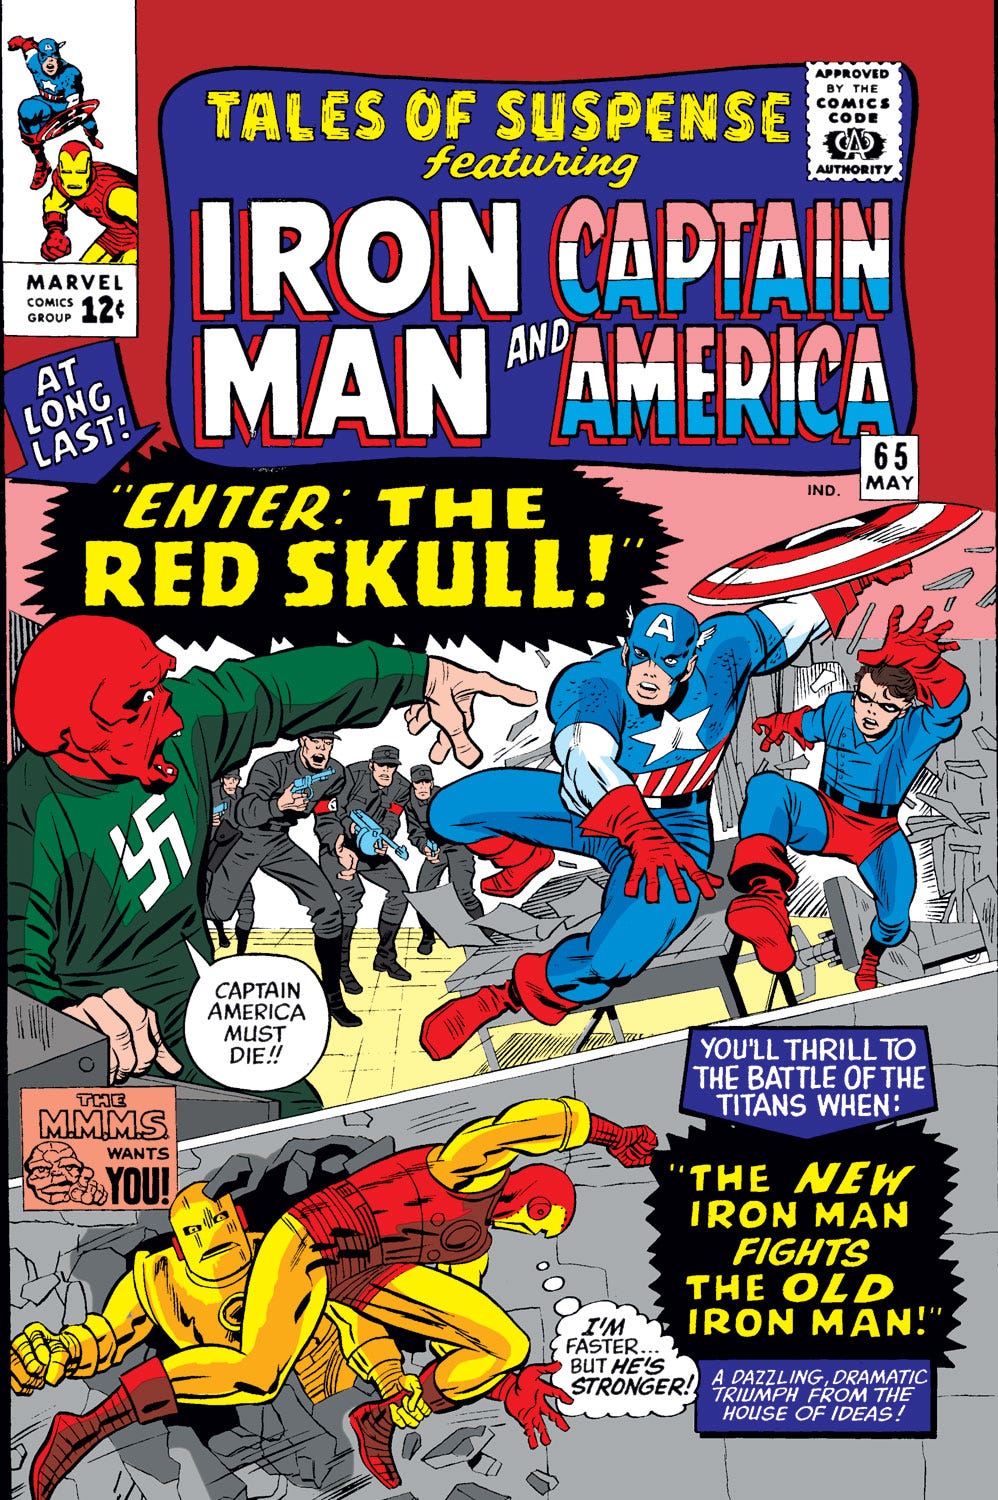 E196: Conspiracy Theories (Tales of Suspense #65) -- May 1965